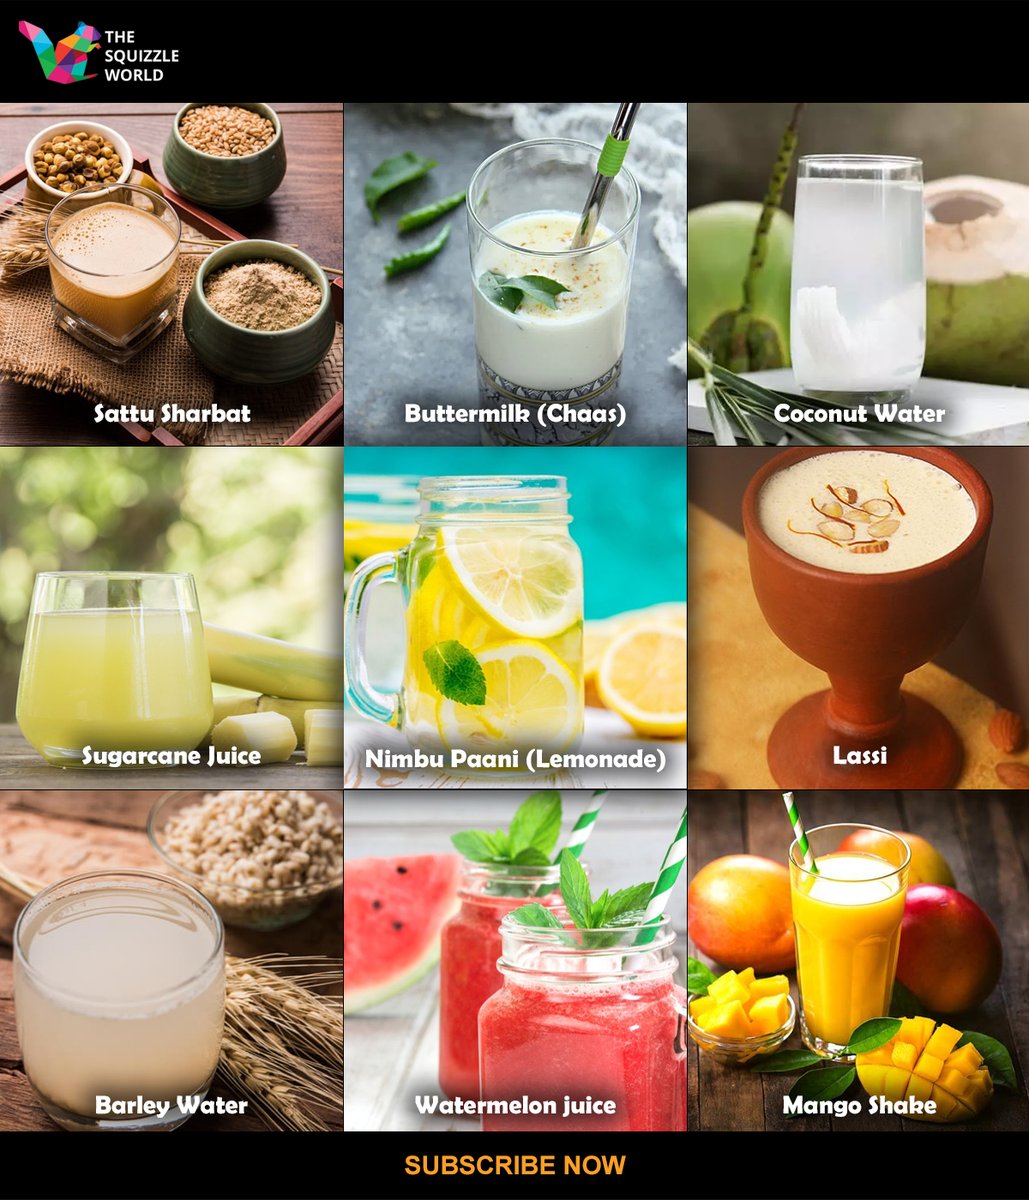 Beat the summer heat with easy homemade drinks

Choose from the available #subscription options today! Visit bit.ly/3as8tW8 for more information.

#kids #TopMagazine #KidsMagazines #Quizzes #Games #ChildrenMagazines #BestMagazines #MyMagazine #MagsWeLove #PageMagazine